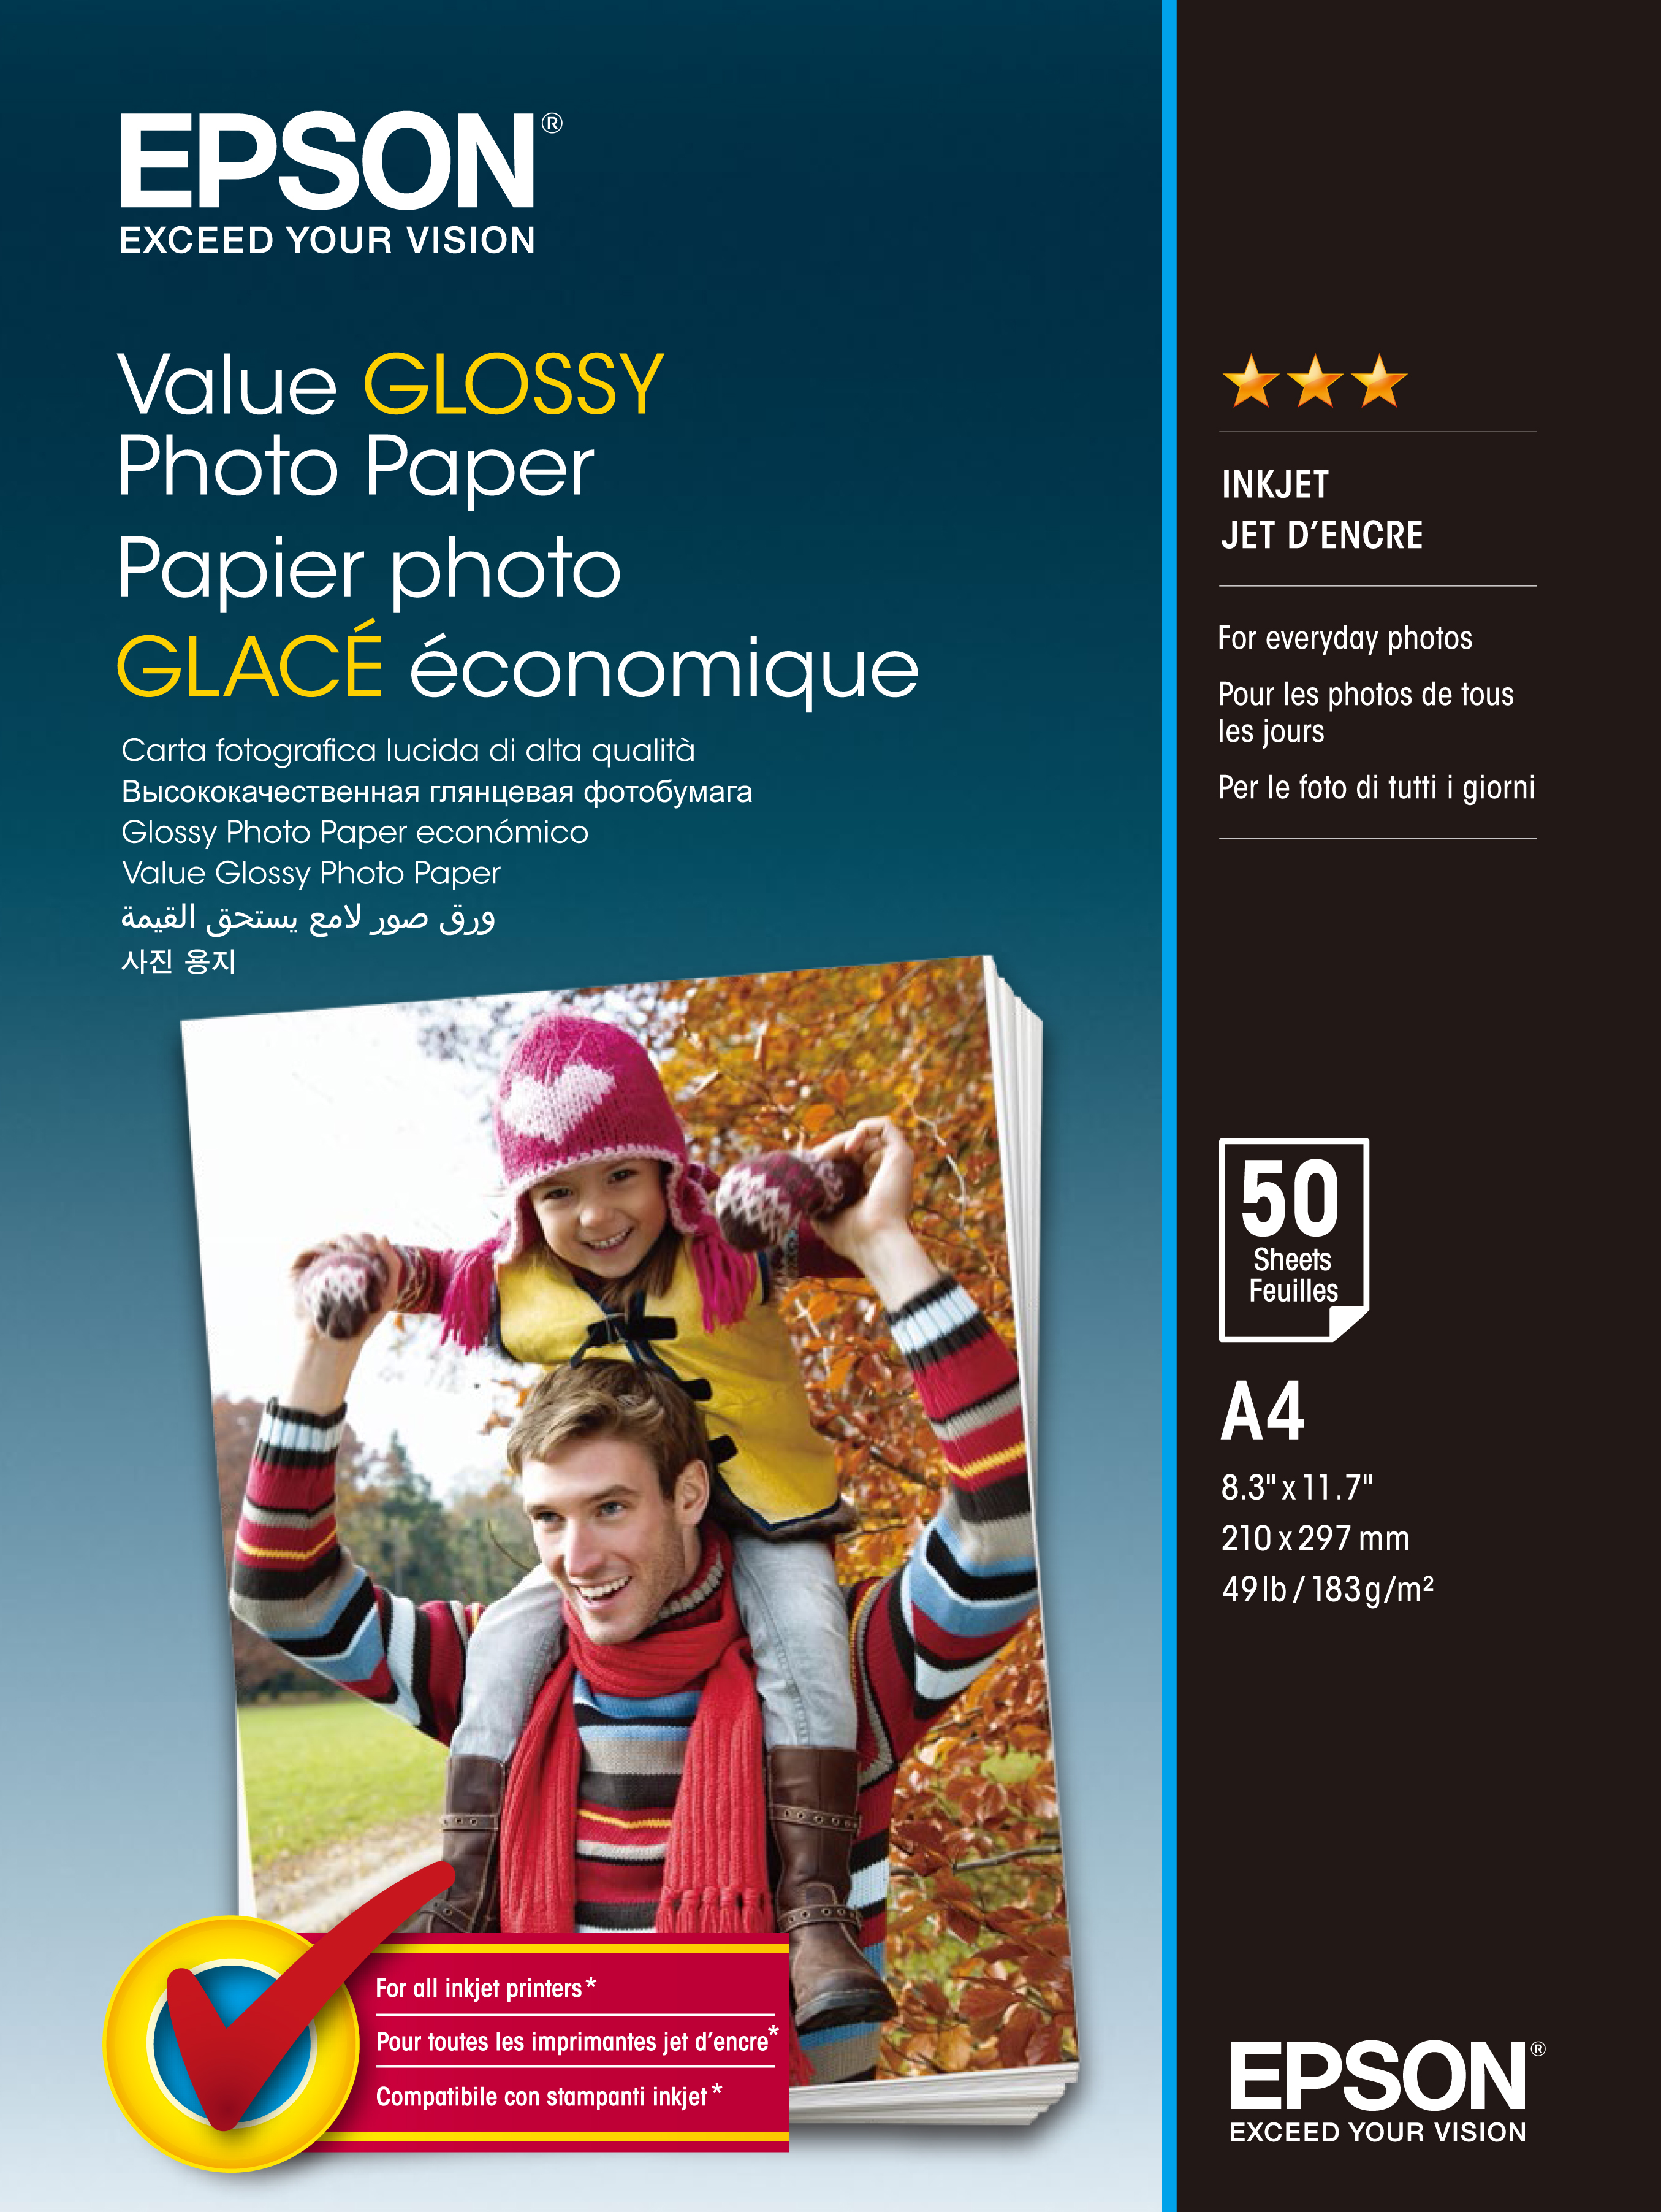 EPSON Paper Value Glossy Photo C13S400035